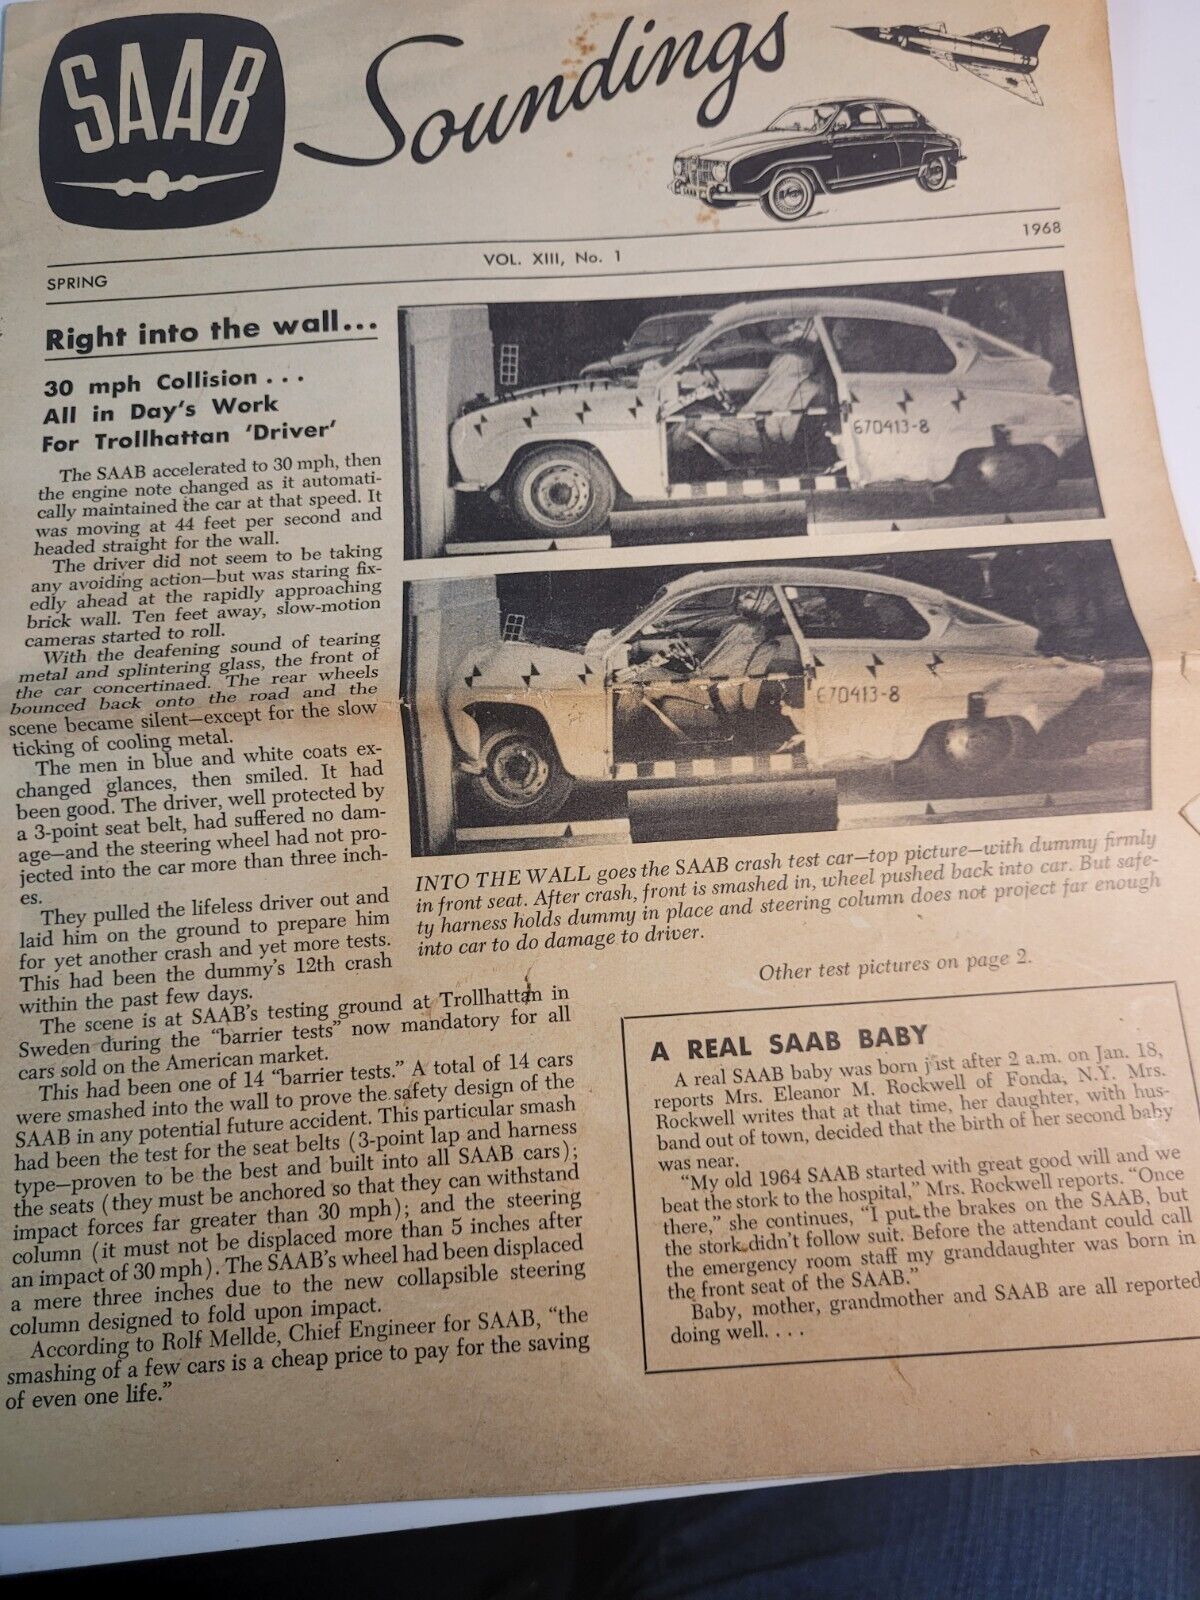 1968 SAAB SOUNDINGS Vol XIII #1 Motor Newsletter 4 Pages Pictures Black& White